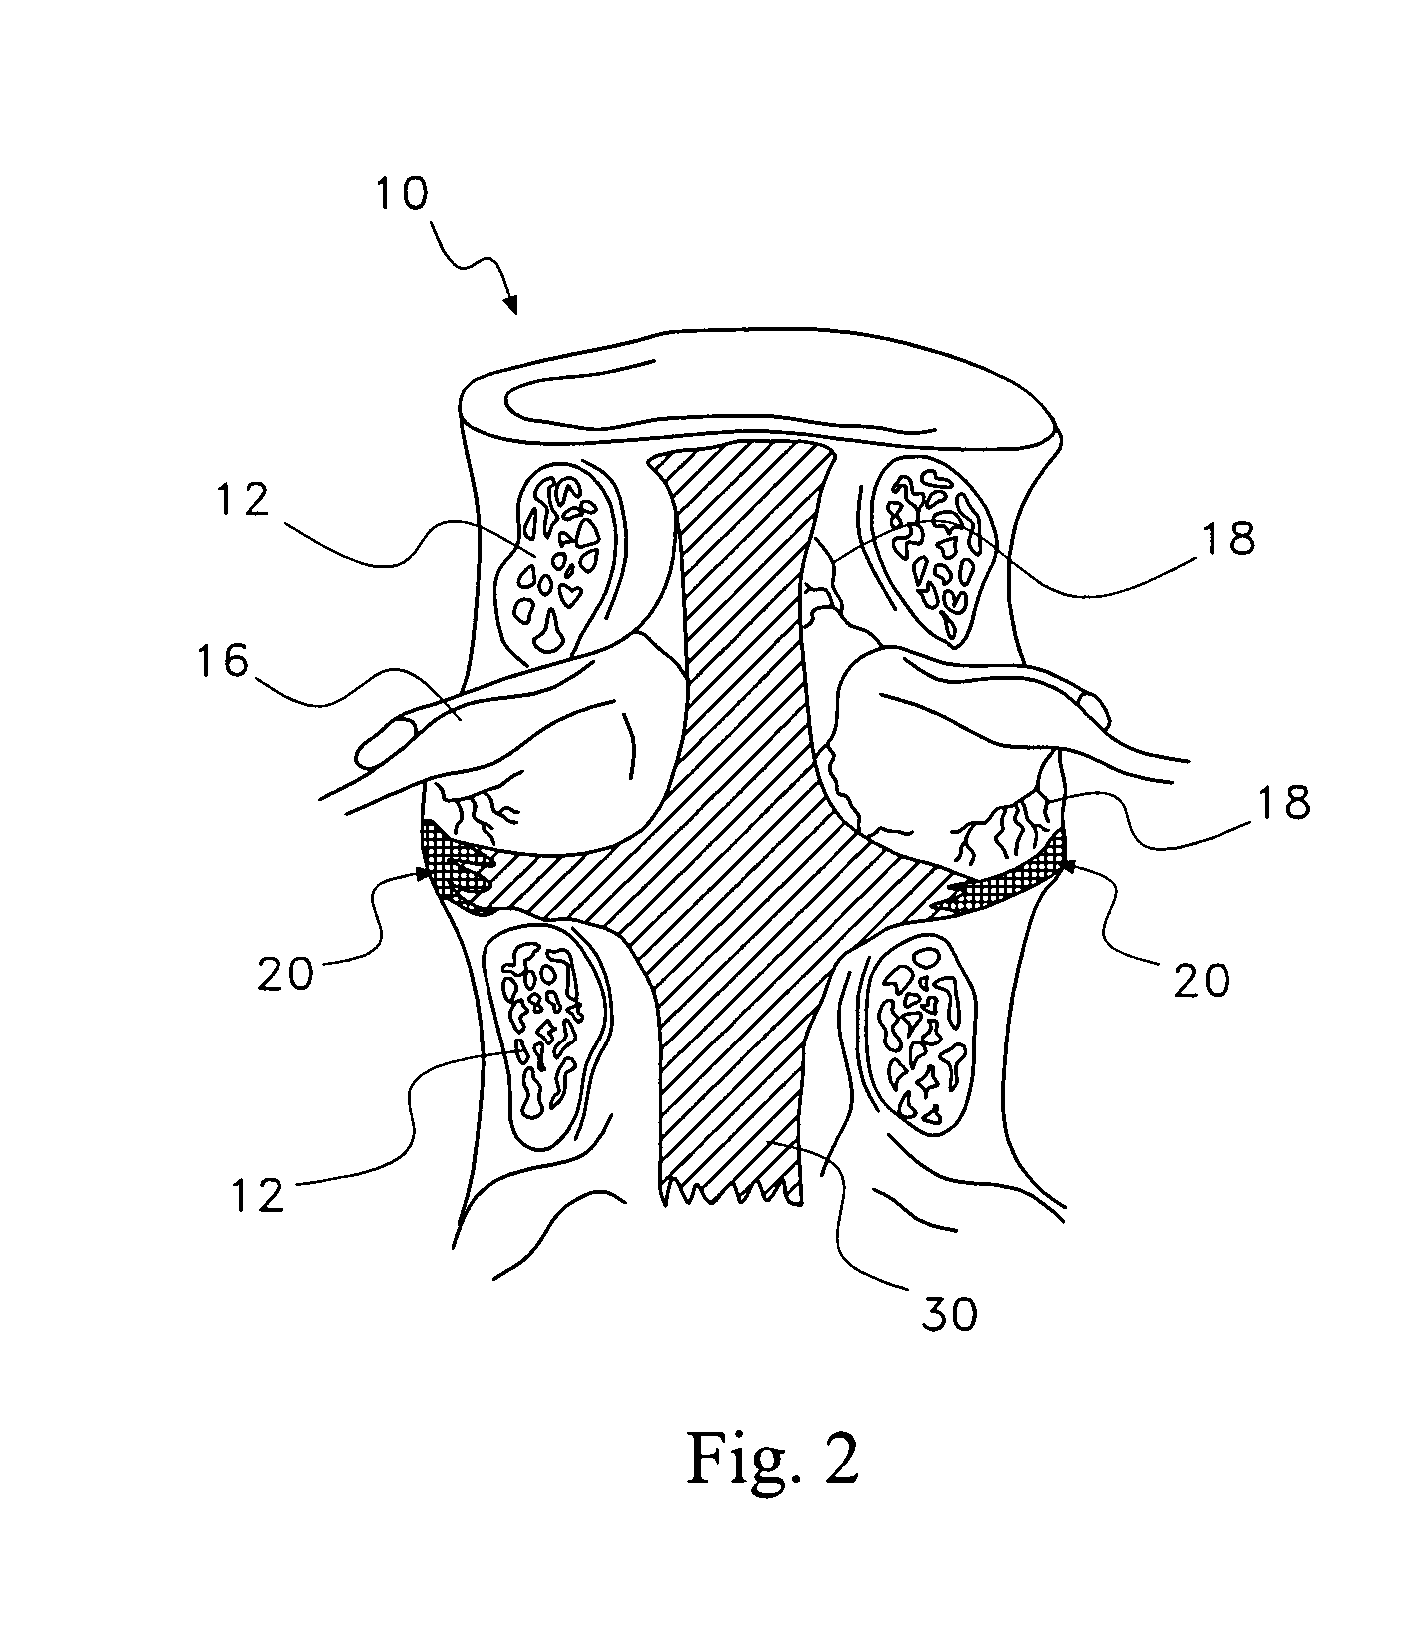 Pharmaceutical removal of vascular extensions from a degenerating disc